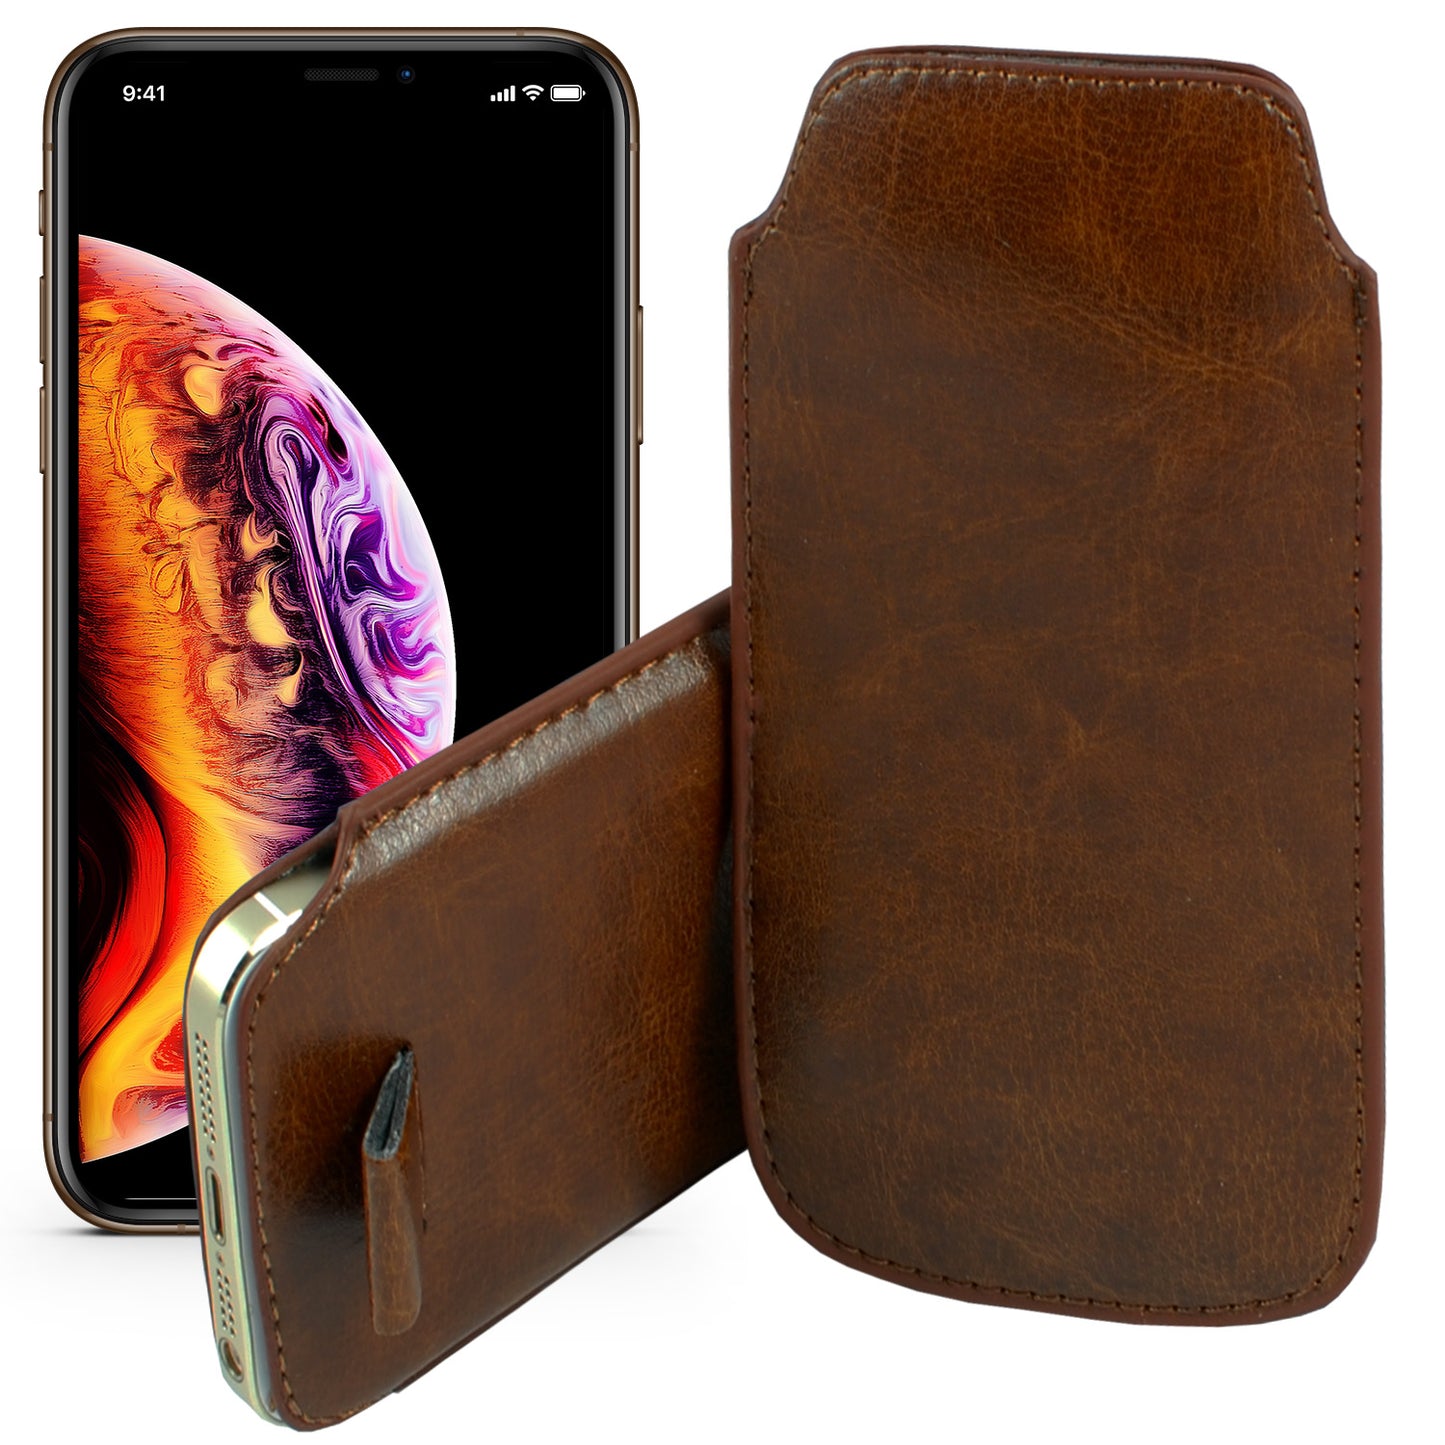 MEZON Apple iPhone 11 (6.1") Brown Pull Tab Slim Faux Leather Pouch Sleeve Case Wireless Charging Compatible (iPhone 11, Brown)